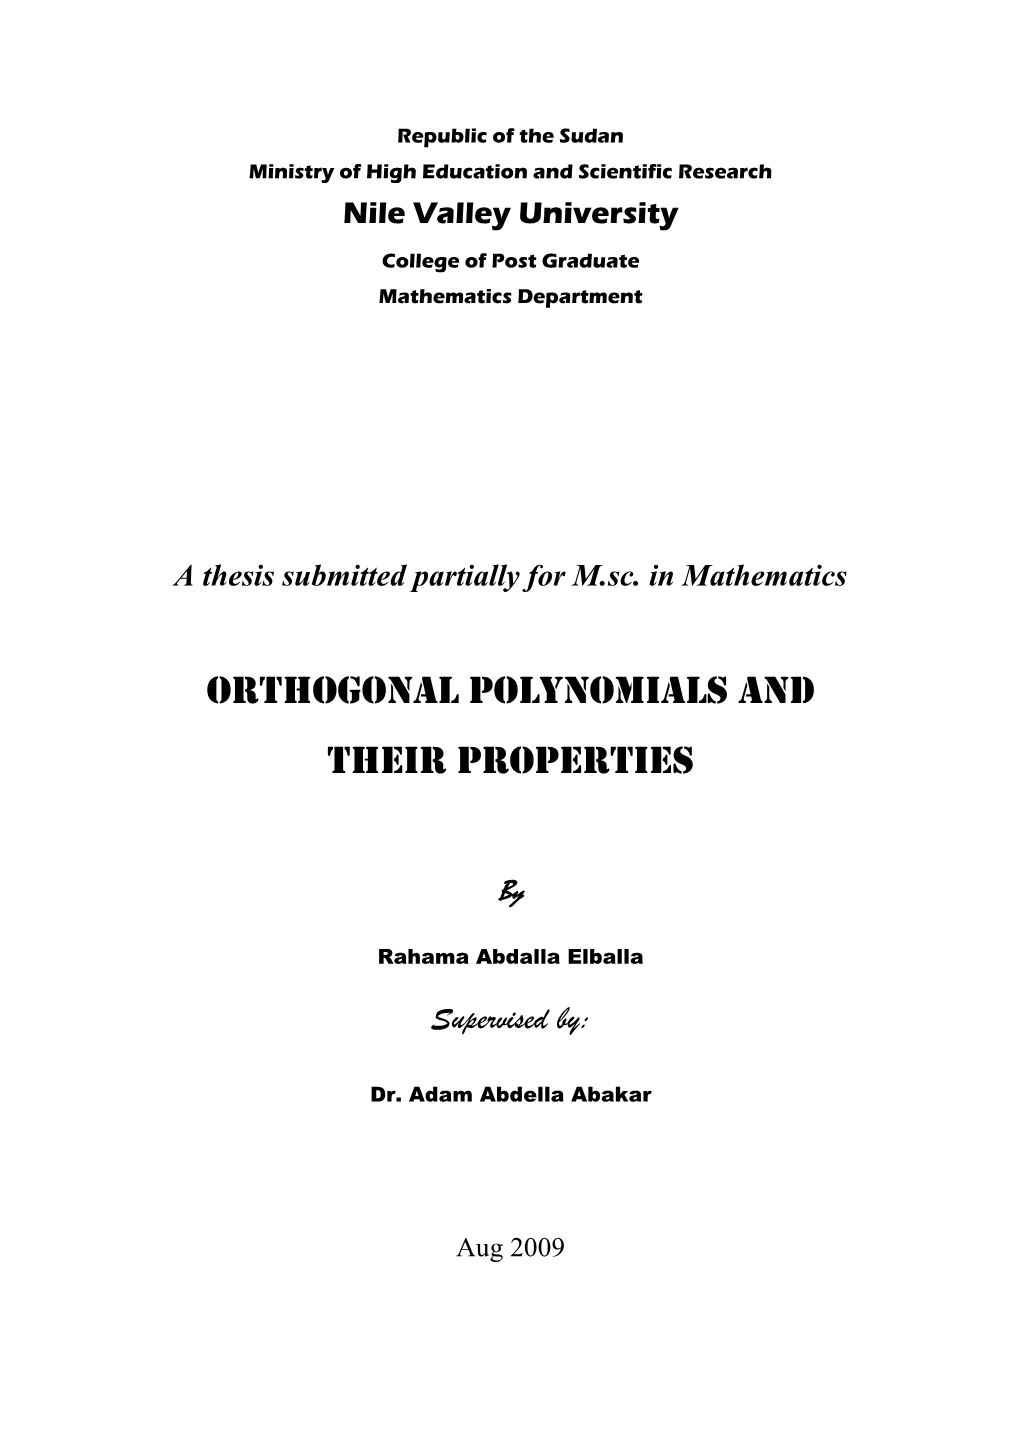 Orthogonal Polynomials and Their Properties